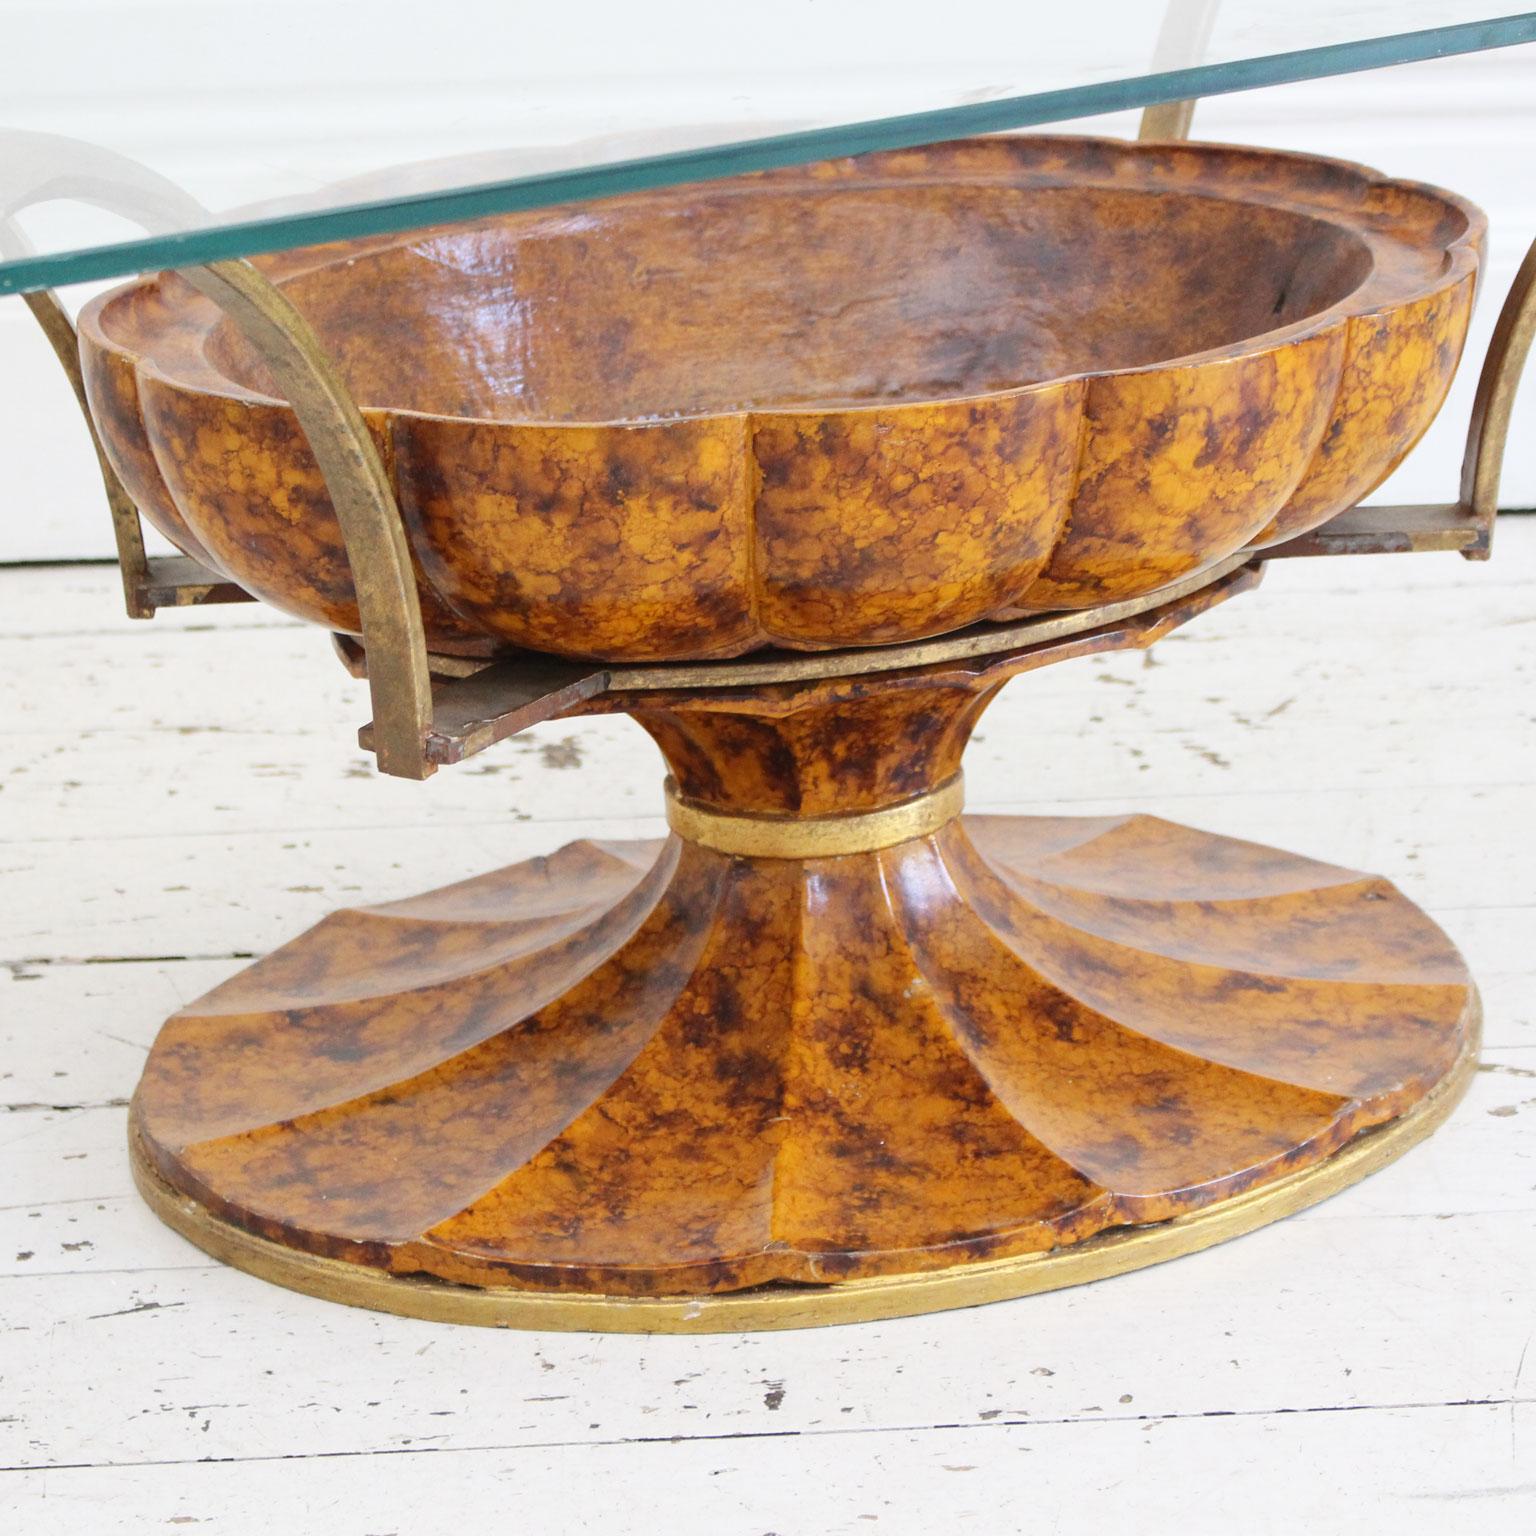 This unusual coffee table was once housed in the Gucci head office in Milan and you can see why. The wonderful urn shape is decorated with hand painted faux tortoiseshell. This has gilded metal bands and arms which splay out to support the glass